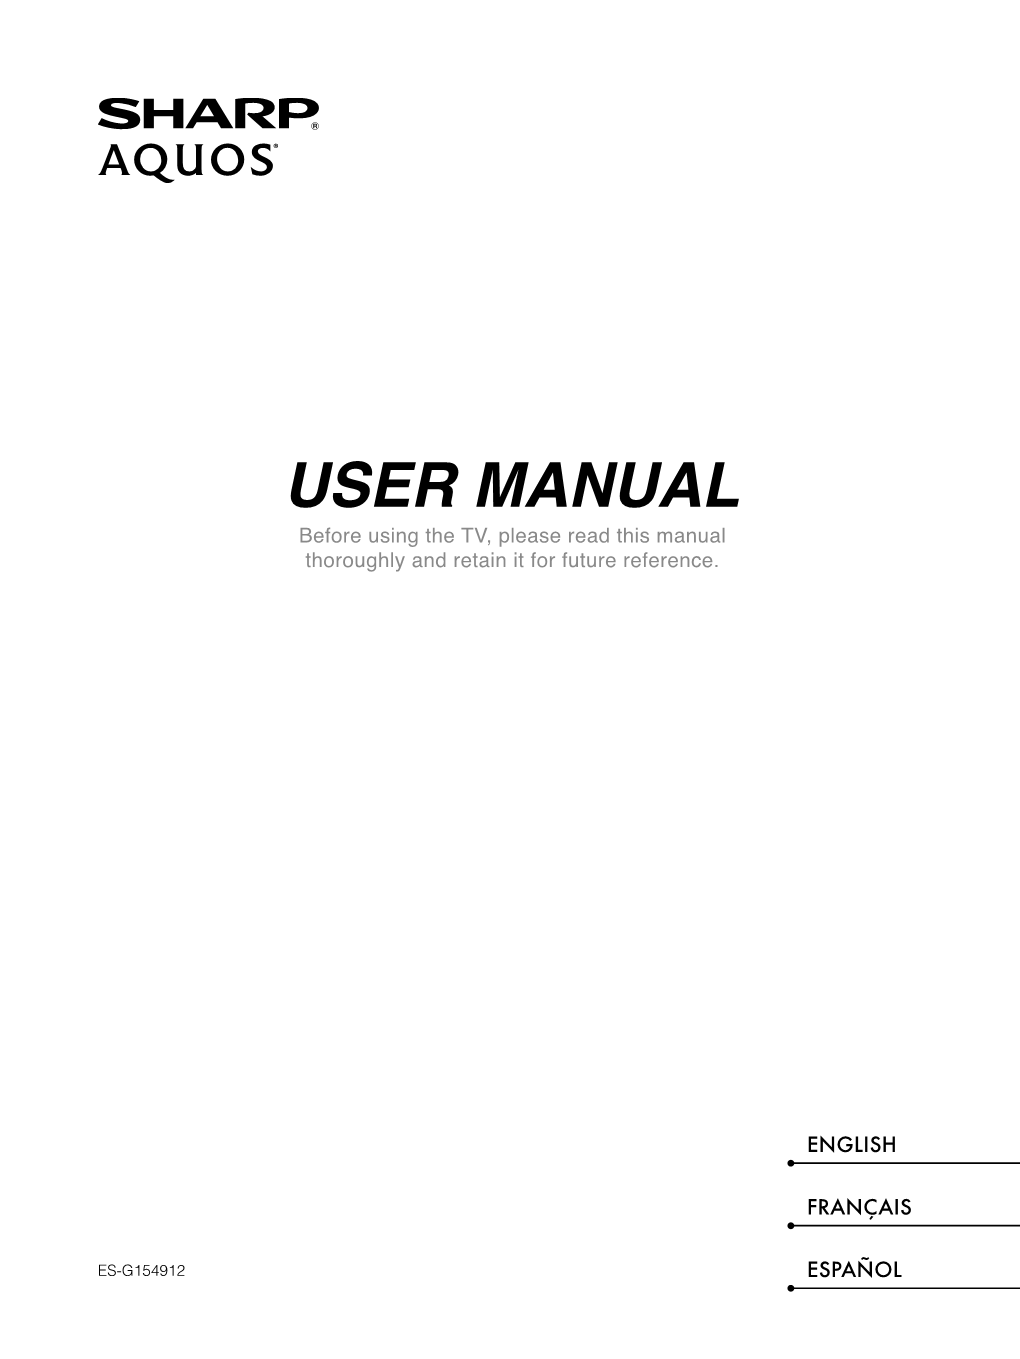 USER MANUAL Before Using the TV, Please Read This Manual Thoroughly and Retain It for Future Reference